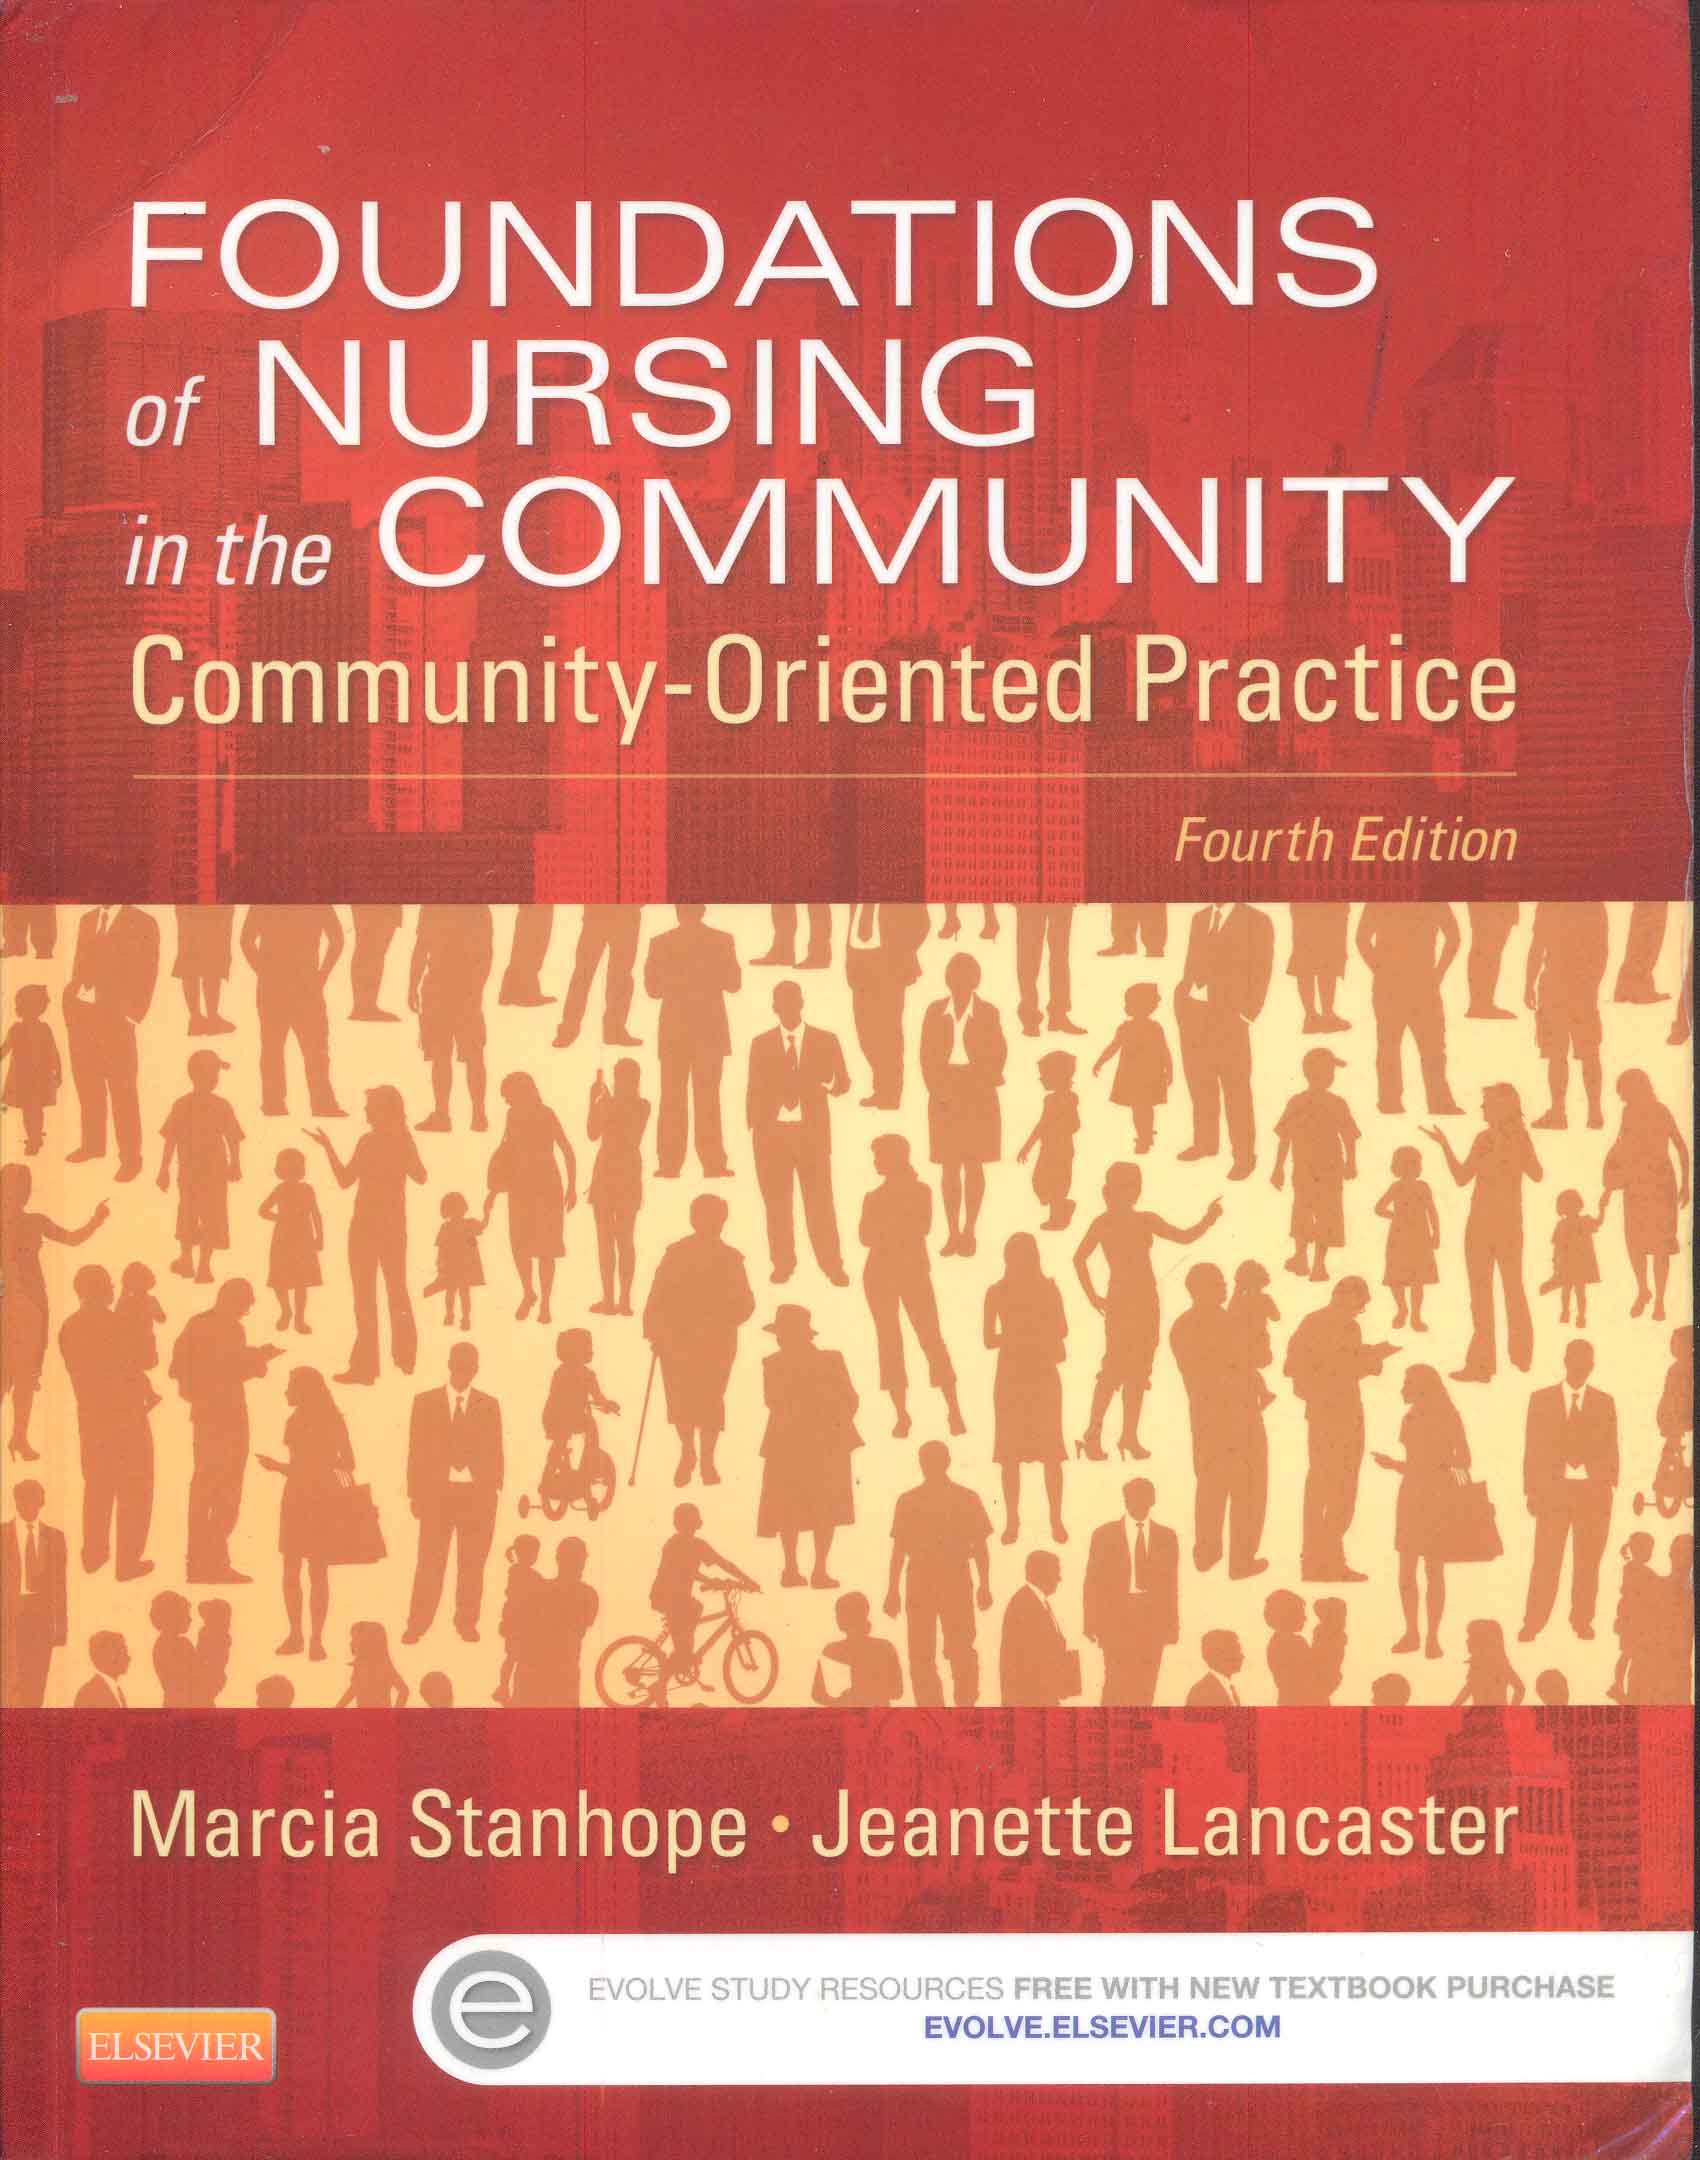 Foundations of nursing in the community : community - oriented practice